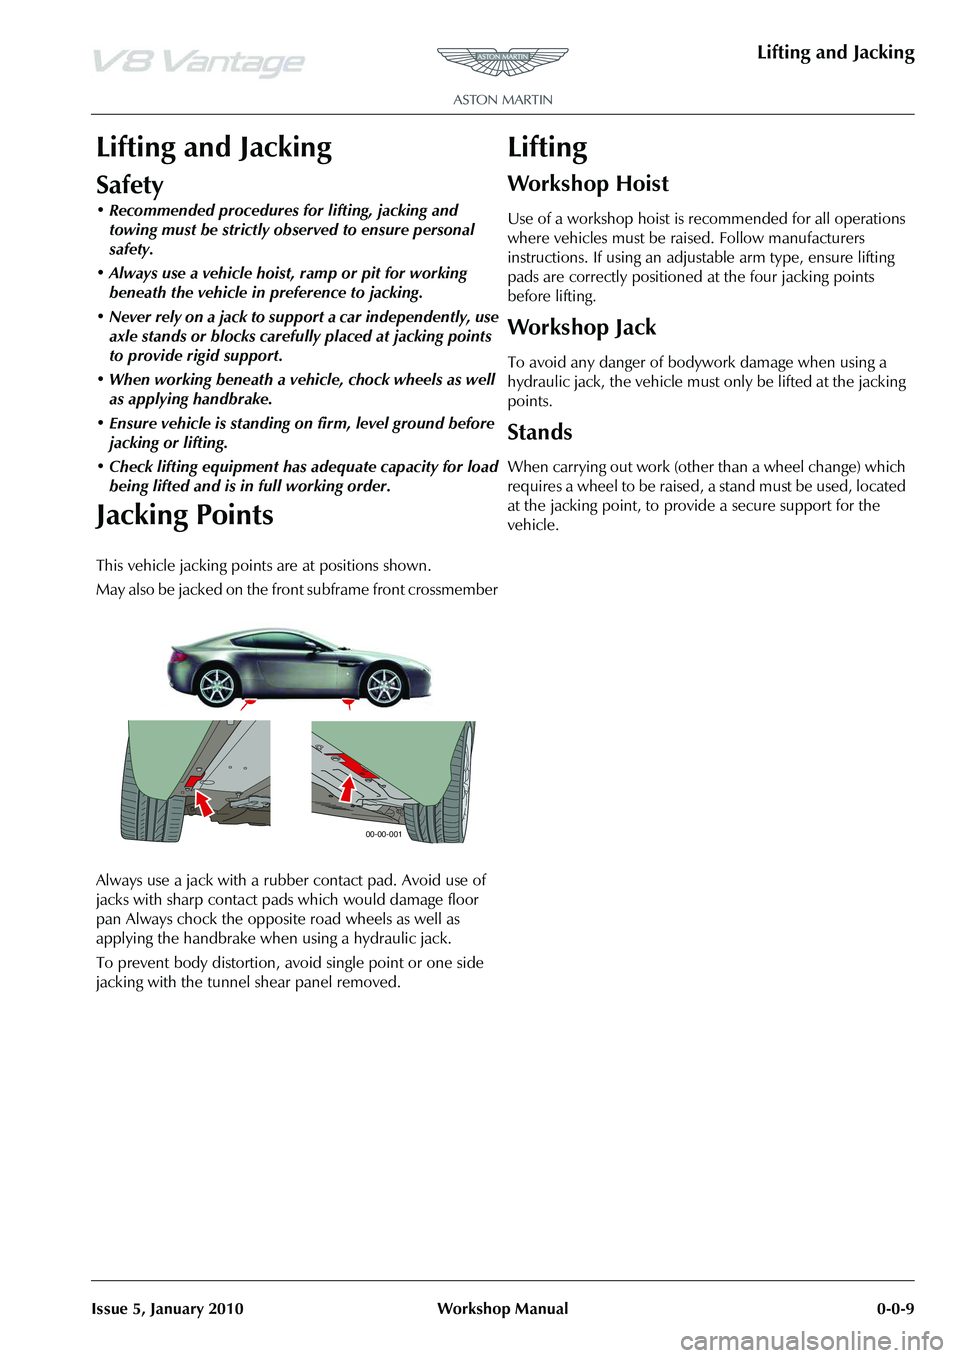 ASTON MARTIN V8 VANTAGE 2010  Workshop Manual Lifting and Jacking
Issue 5, January 2010 Workshop Manual 0-0-9
Lifting and Jacking
Safety
•Recommended procedures for lifting, jacking and 
towing must be strictly ob served to ensure personal 
saf